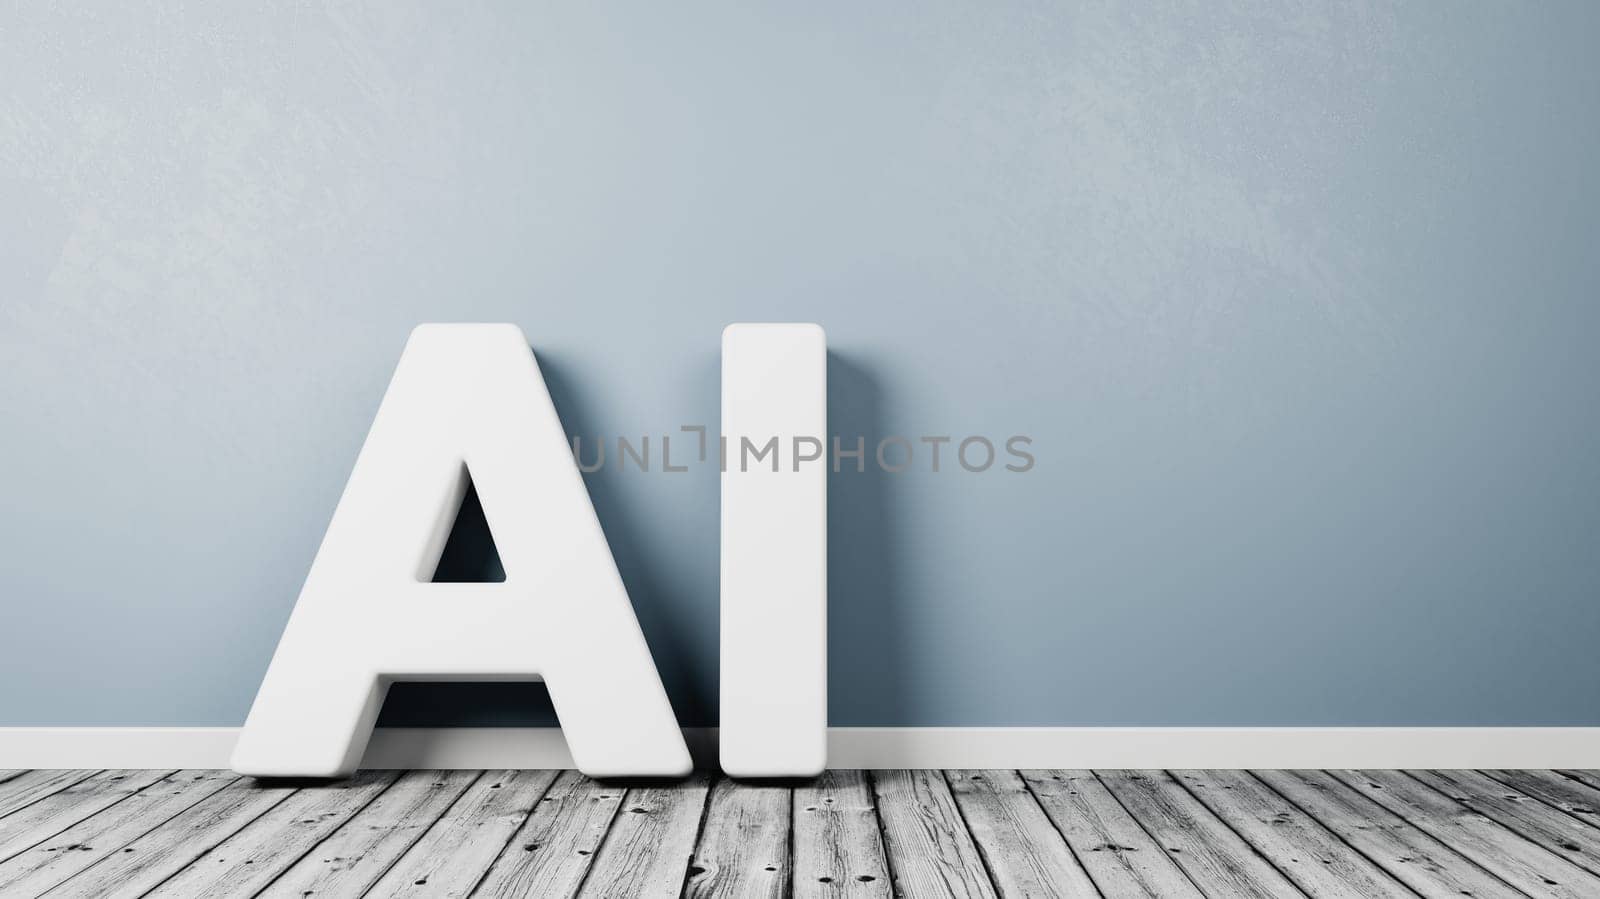 White AI Text 3D Shape on Wooden Floor Against Blue Wall with Copy Space 3D Render Illustration